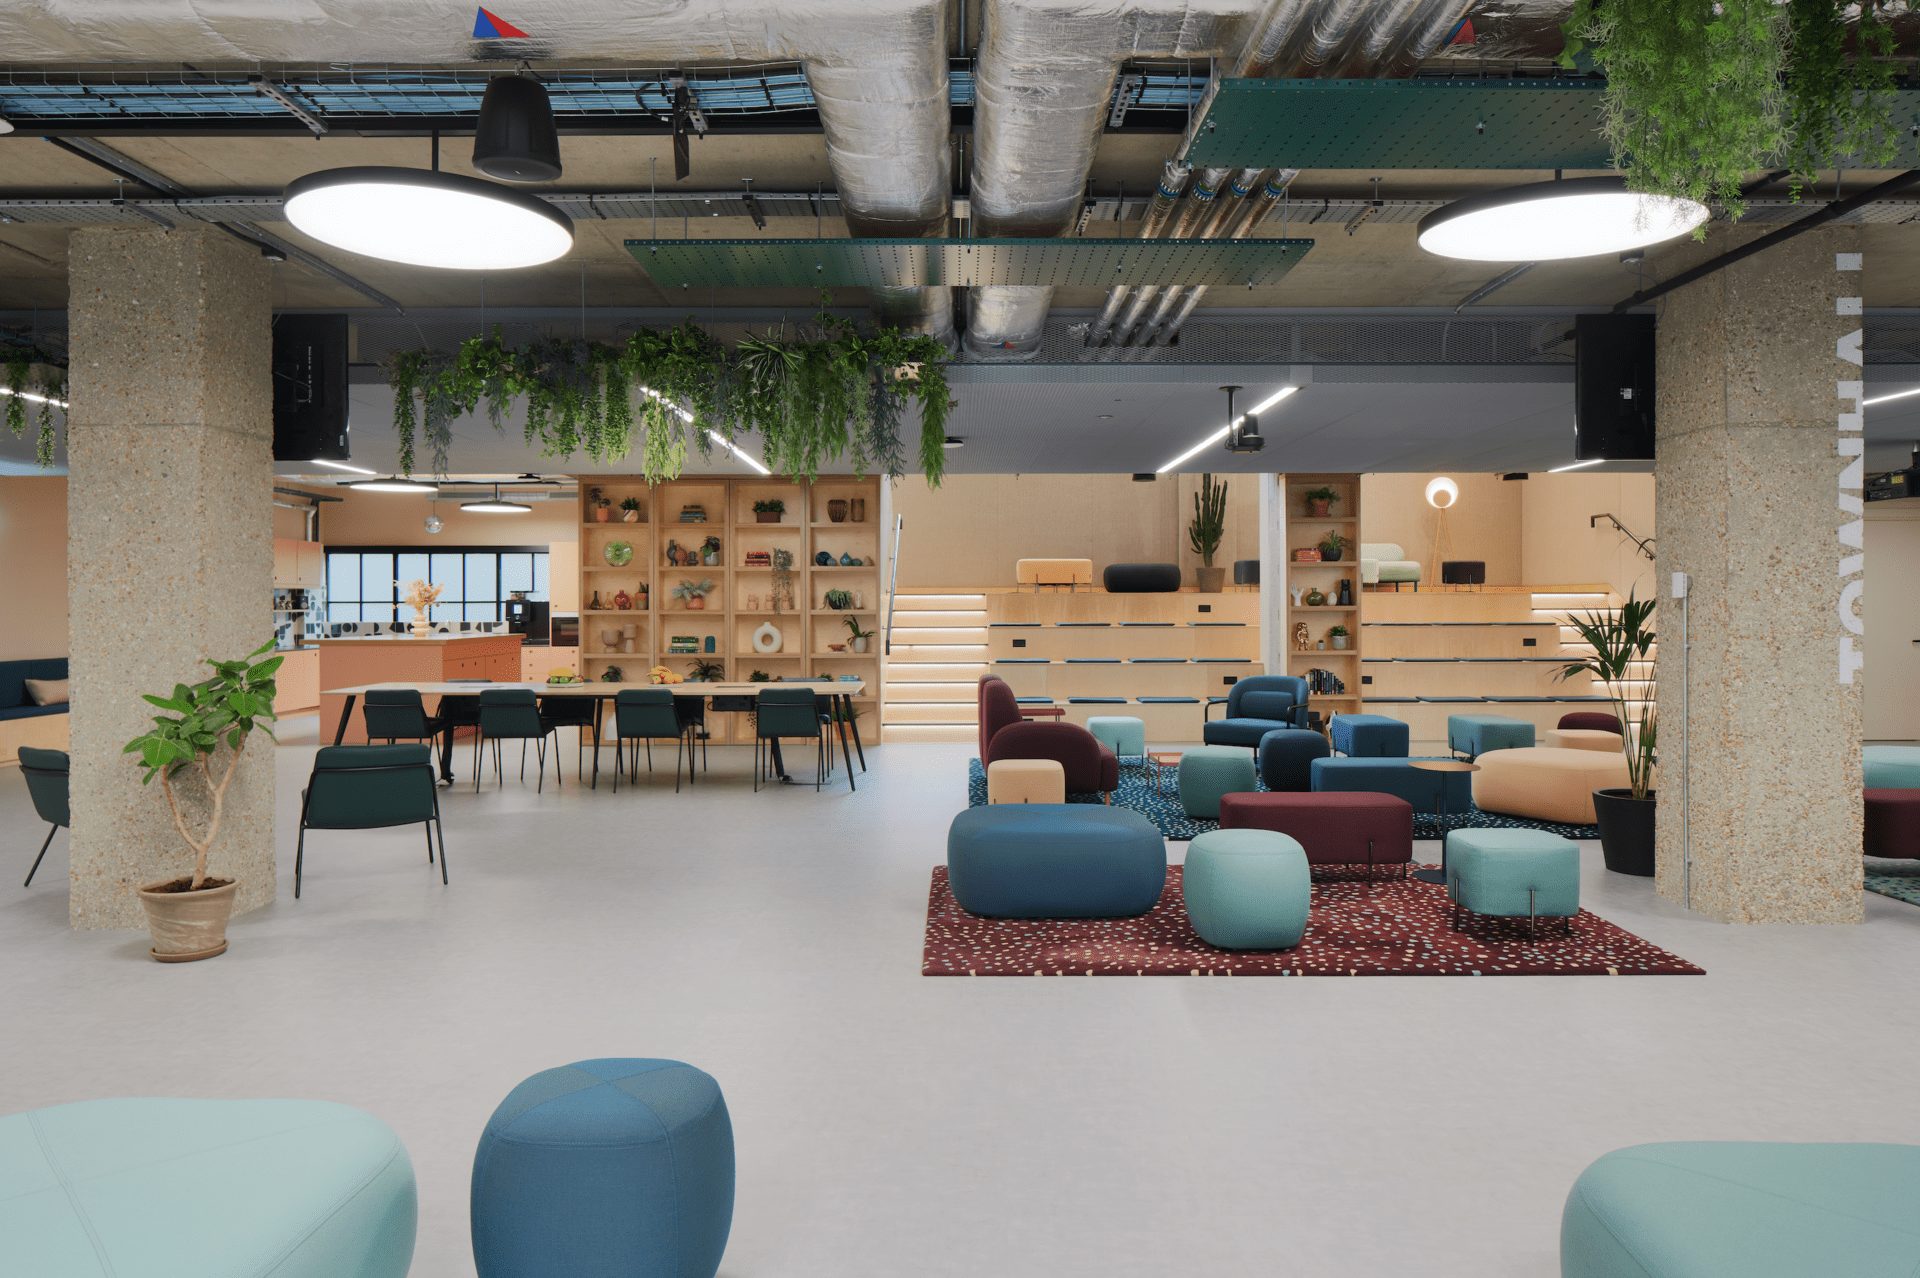 This revamped London HQ designed by Trifle* is rooted in community